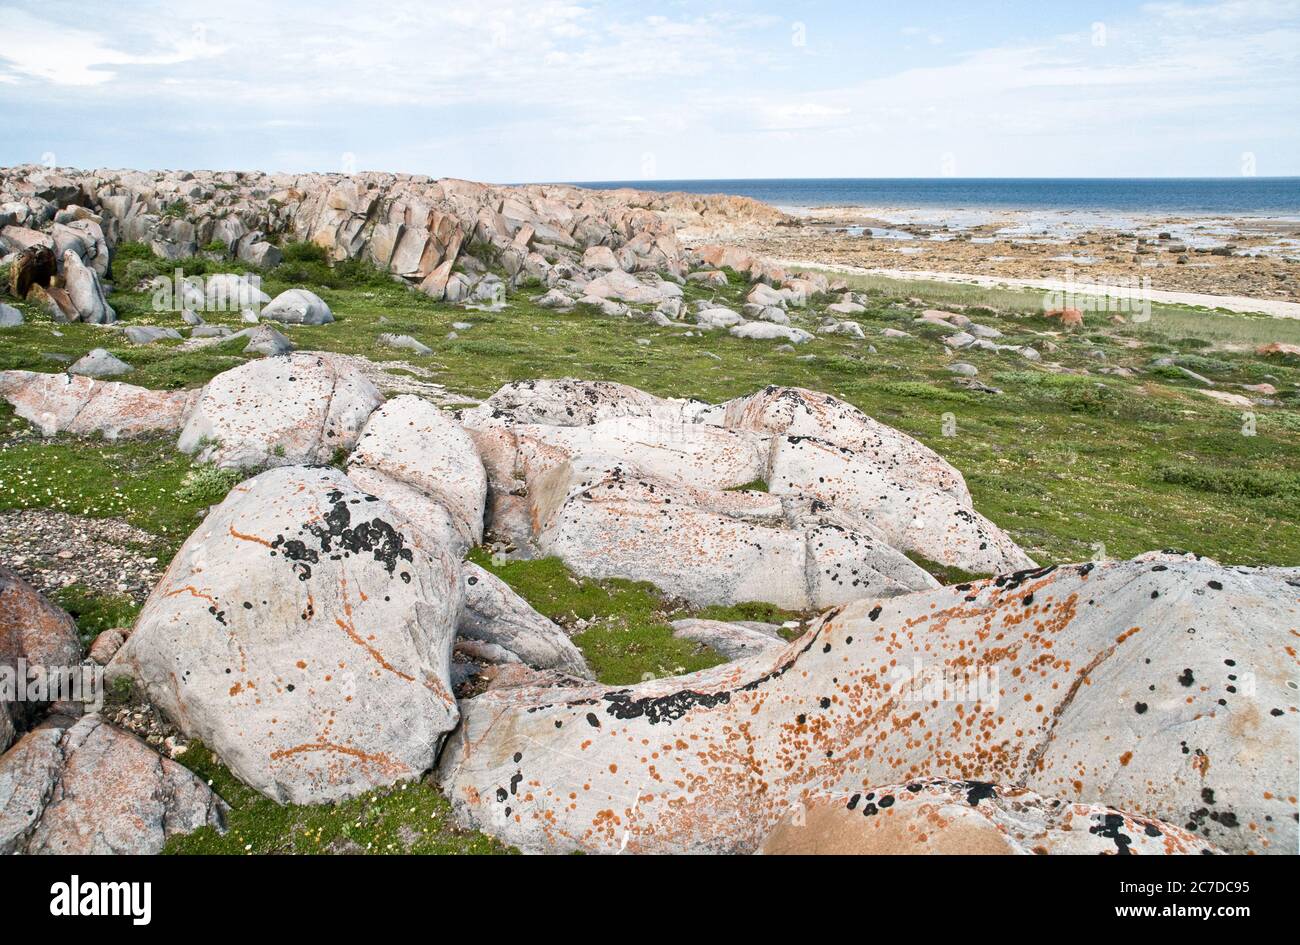 A rocky outcrop on the west coast of Hudson Bay at low tide in the Arctic Ocean, in Canadian Shield terrain, near Churchill, Manitoba, Canada. Stock Photo